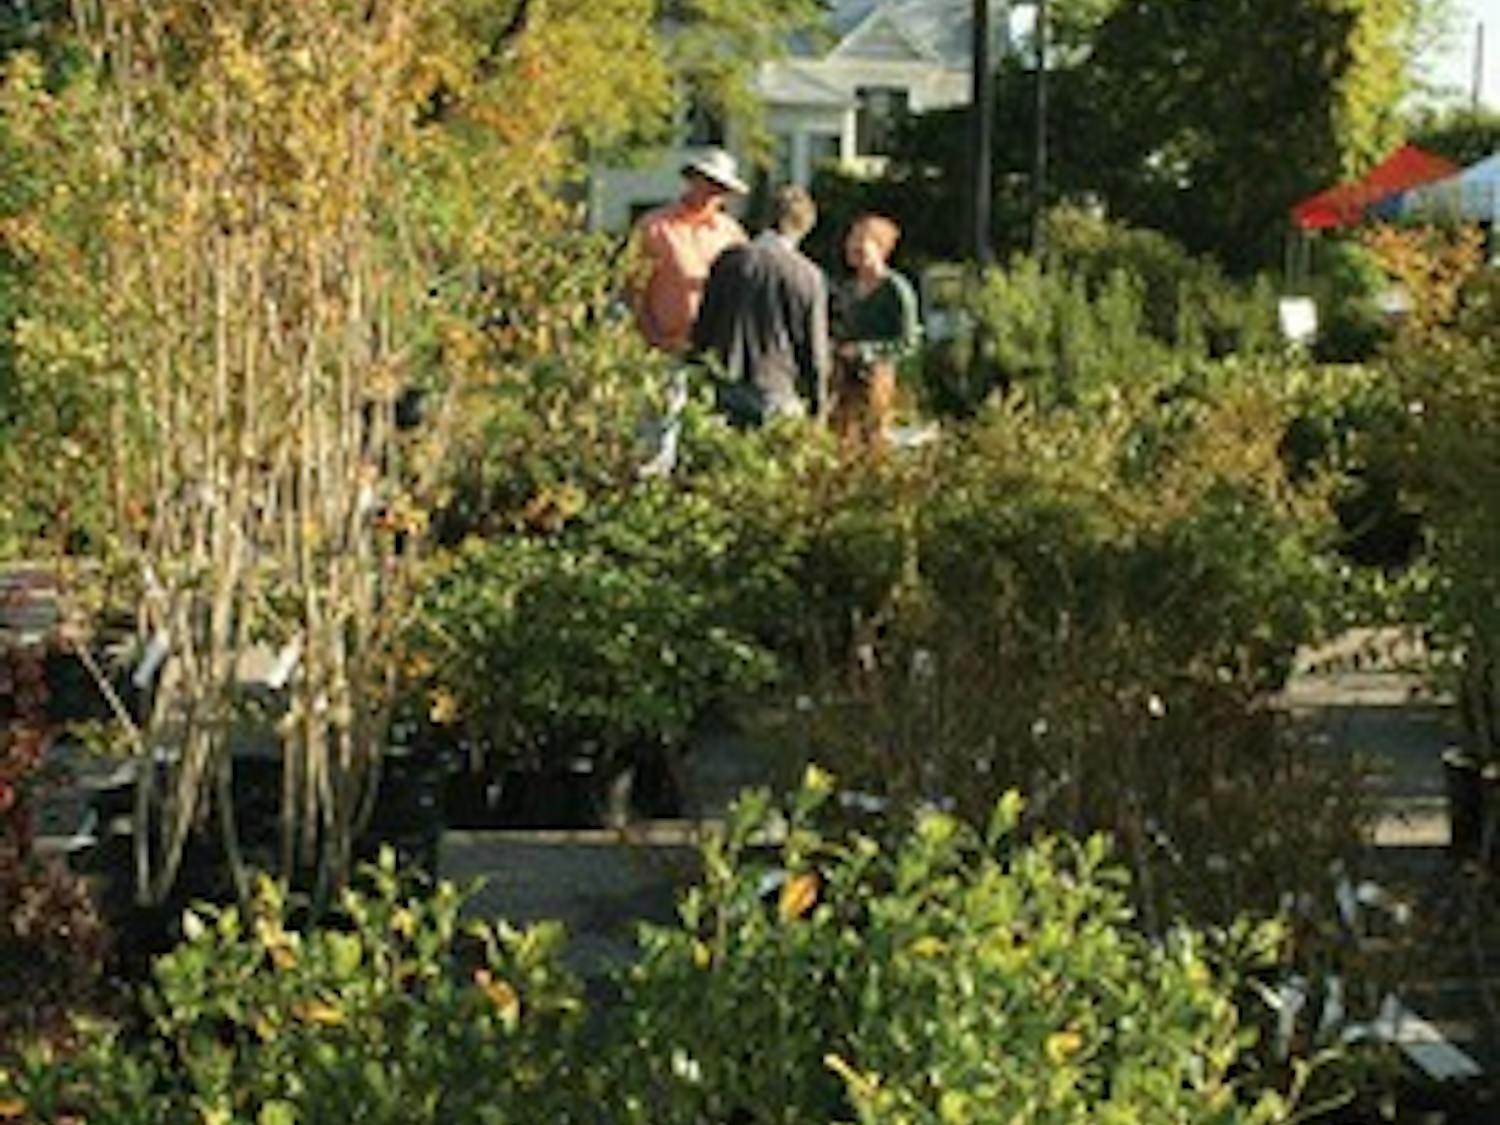 Local residents shop at the A-Day plant sale last Saturday. The Auburn University Campus club and PLANET hosted the sale.